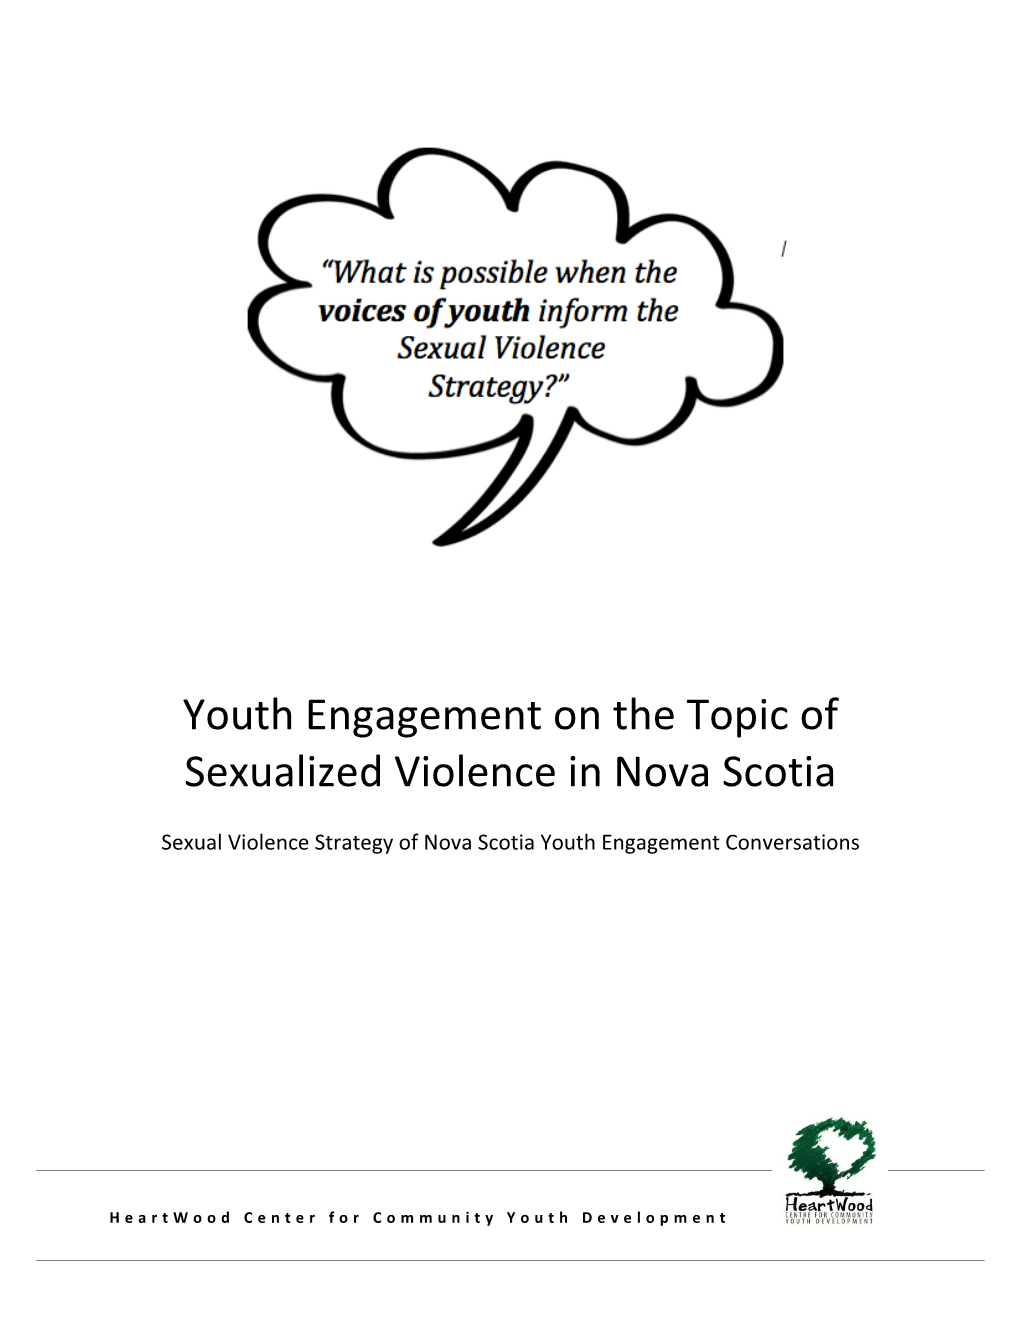 Youth Engagement on the Topic of Sexualized Violence in Nova Scotia